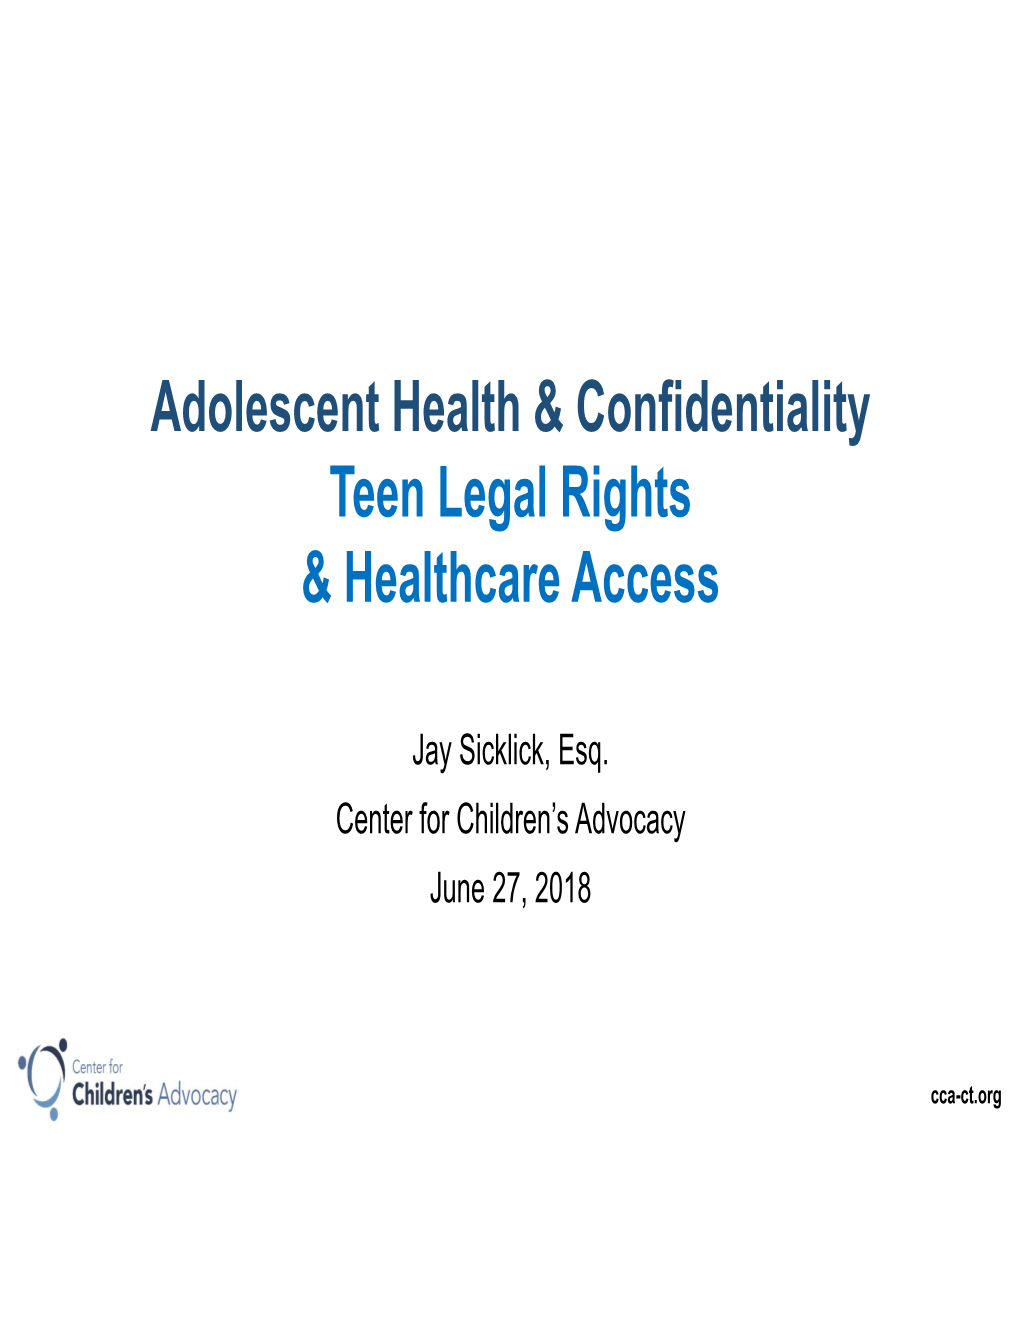 Adolescent Health & Confidentiality Teen Legal Rights & Healthcare